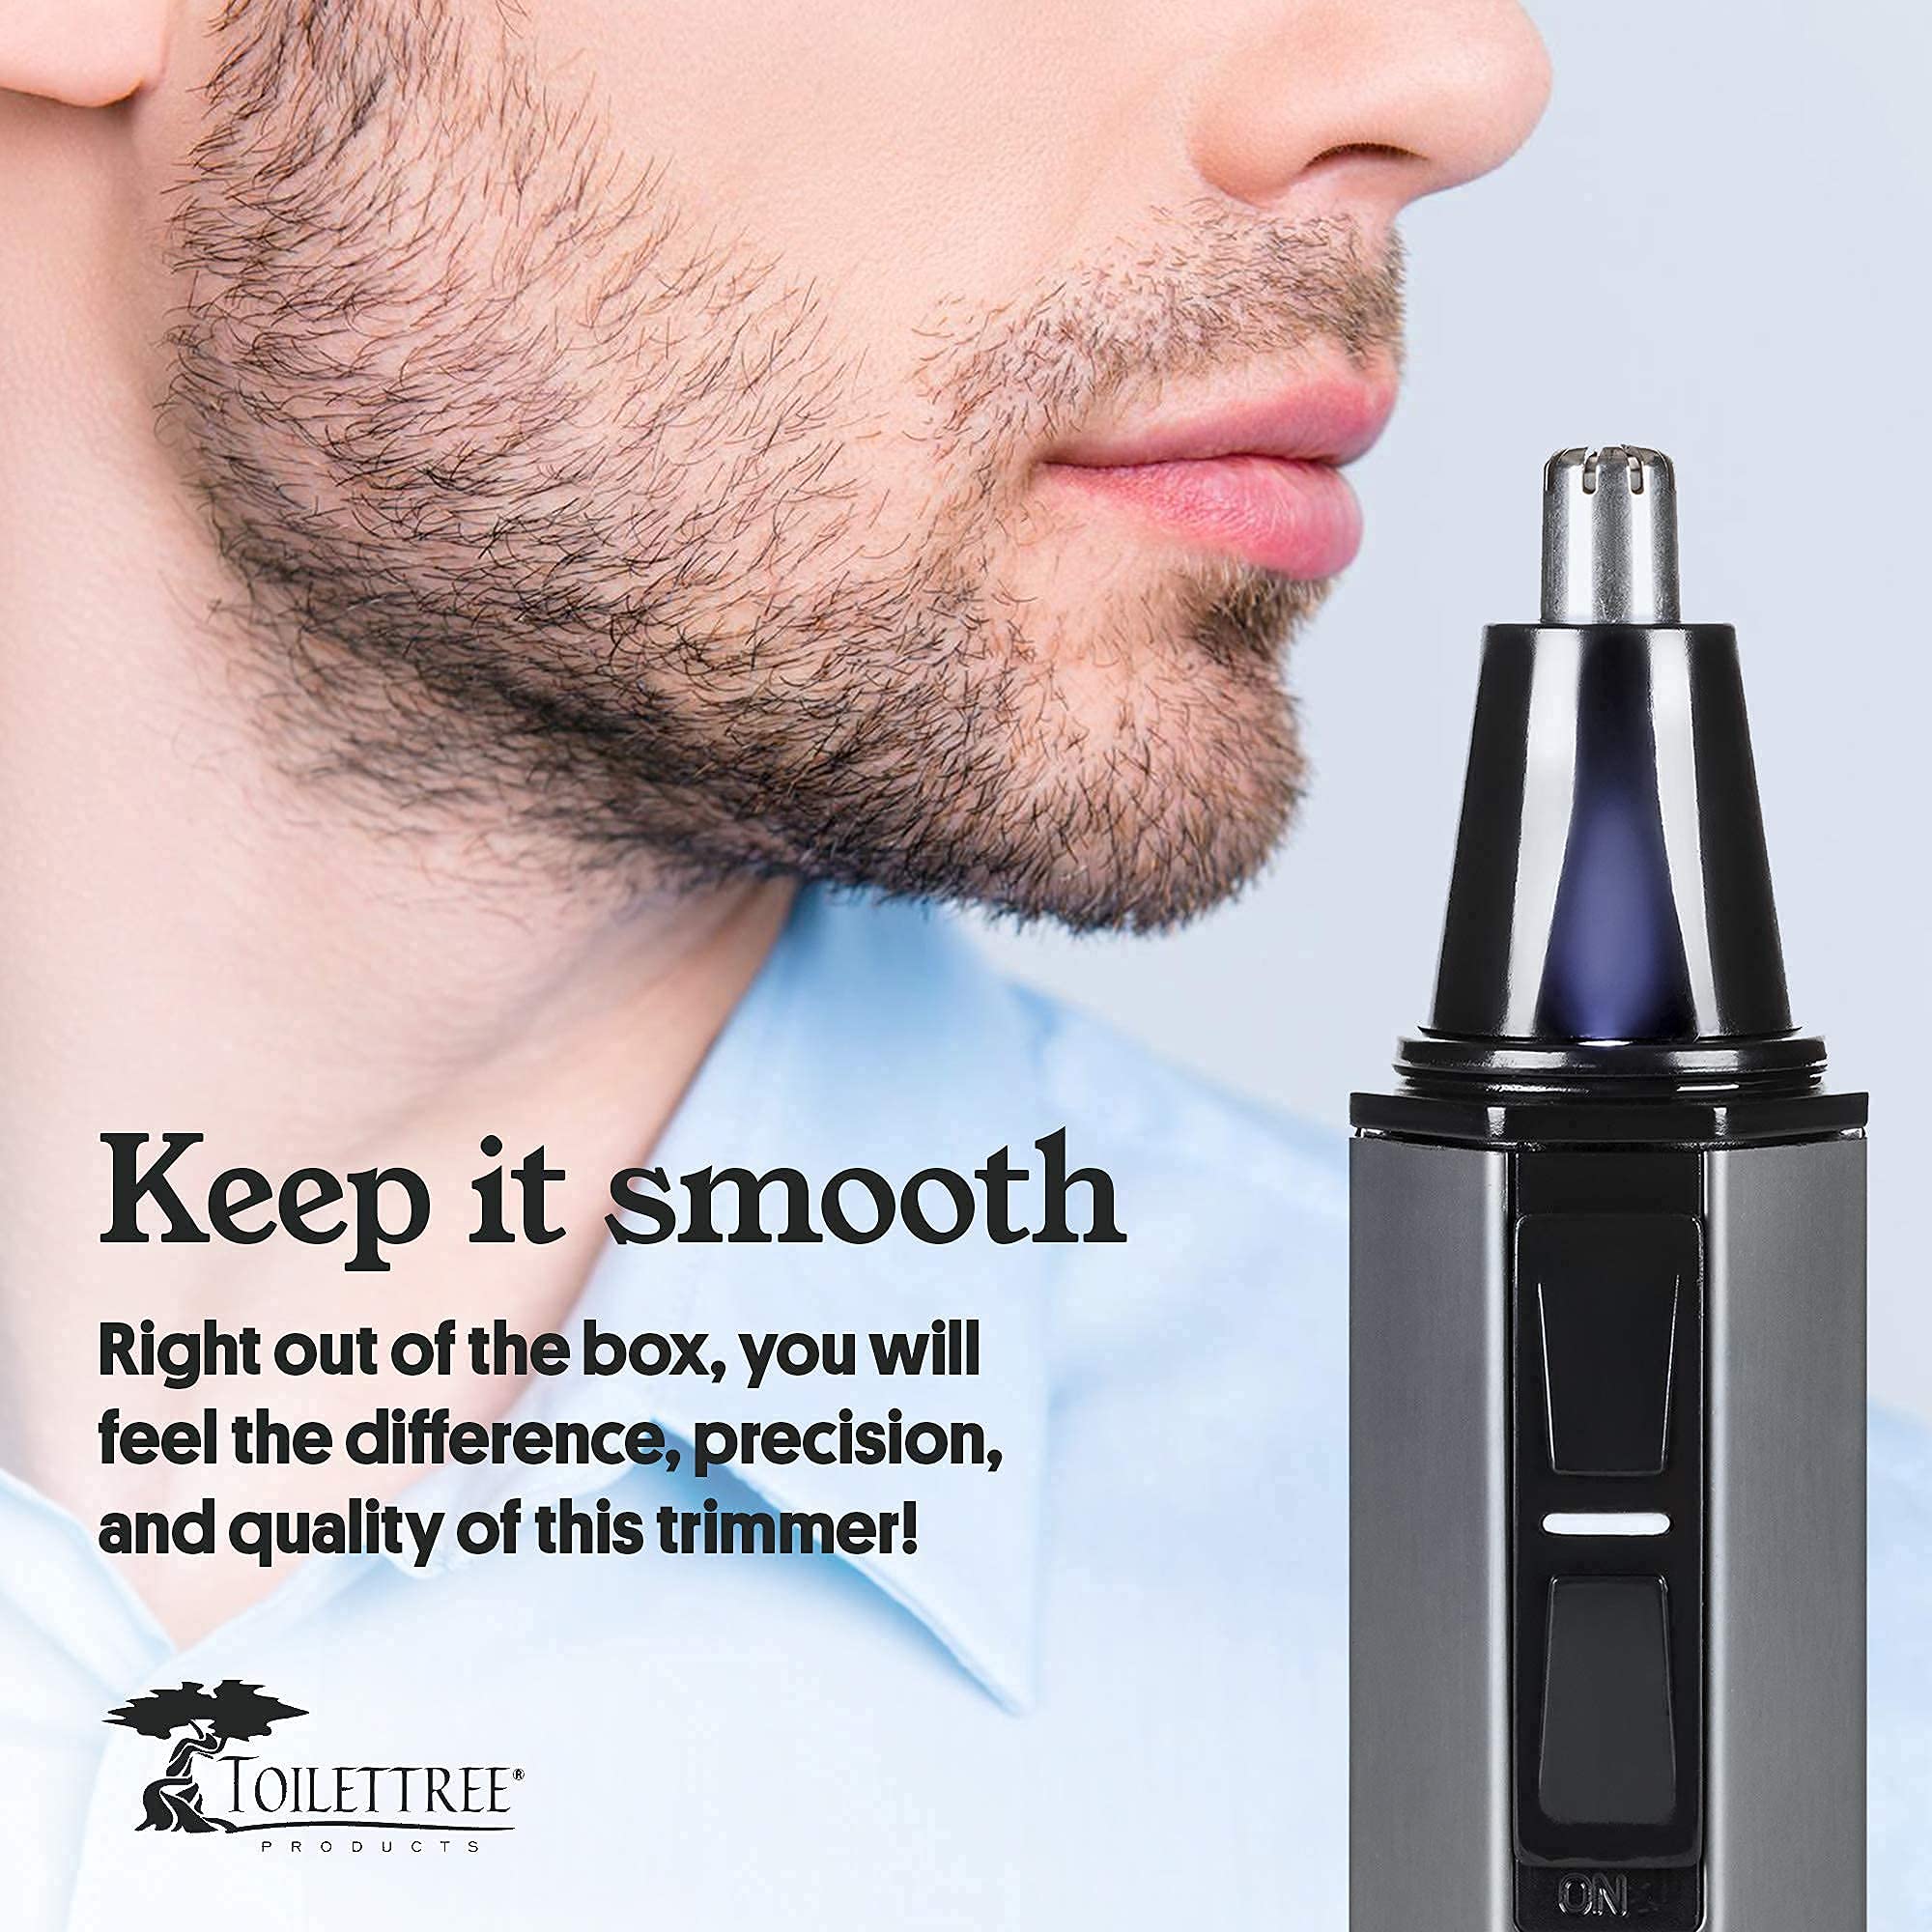 ToiletTree Products Nose Hair Trimmer with LED Light - Stainless Steel, Heavy-Duty Casing - Ear & Nose Hair Trimmer - Men's Grooming Trimmer for Beard, Eyebrows, and Ears